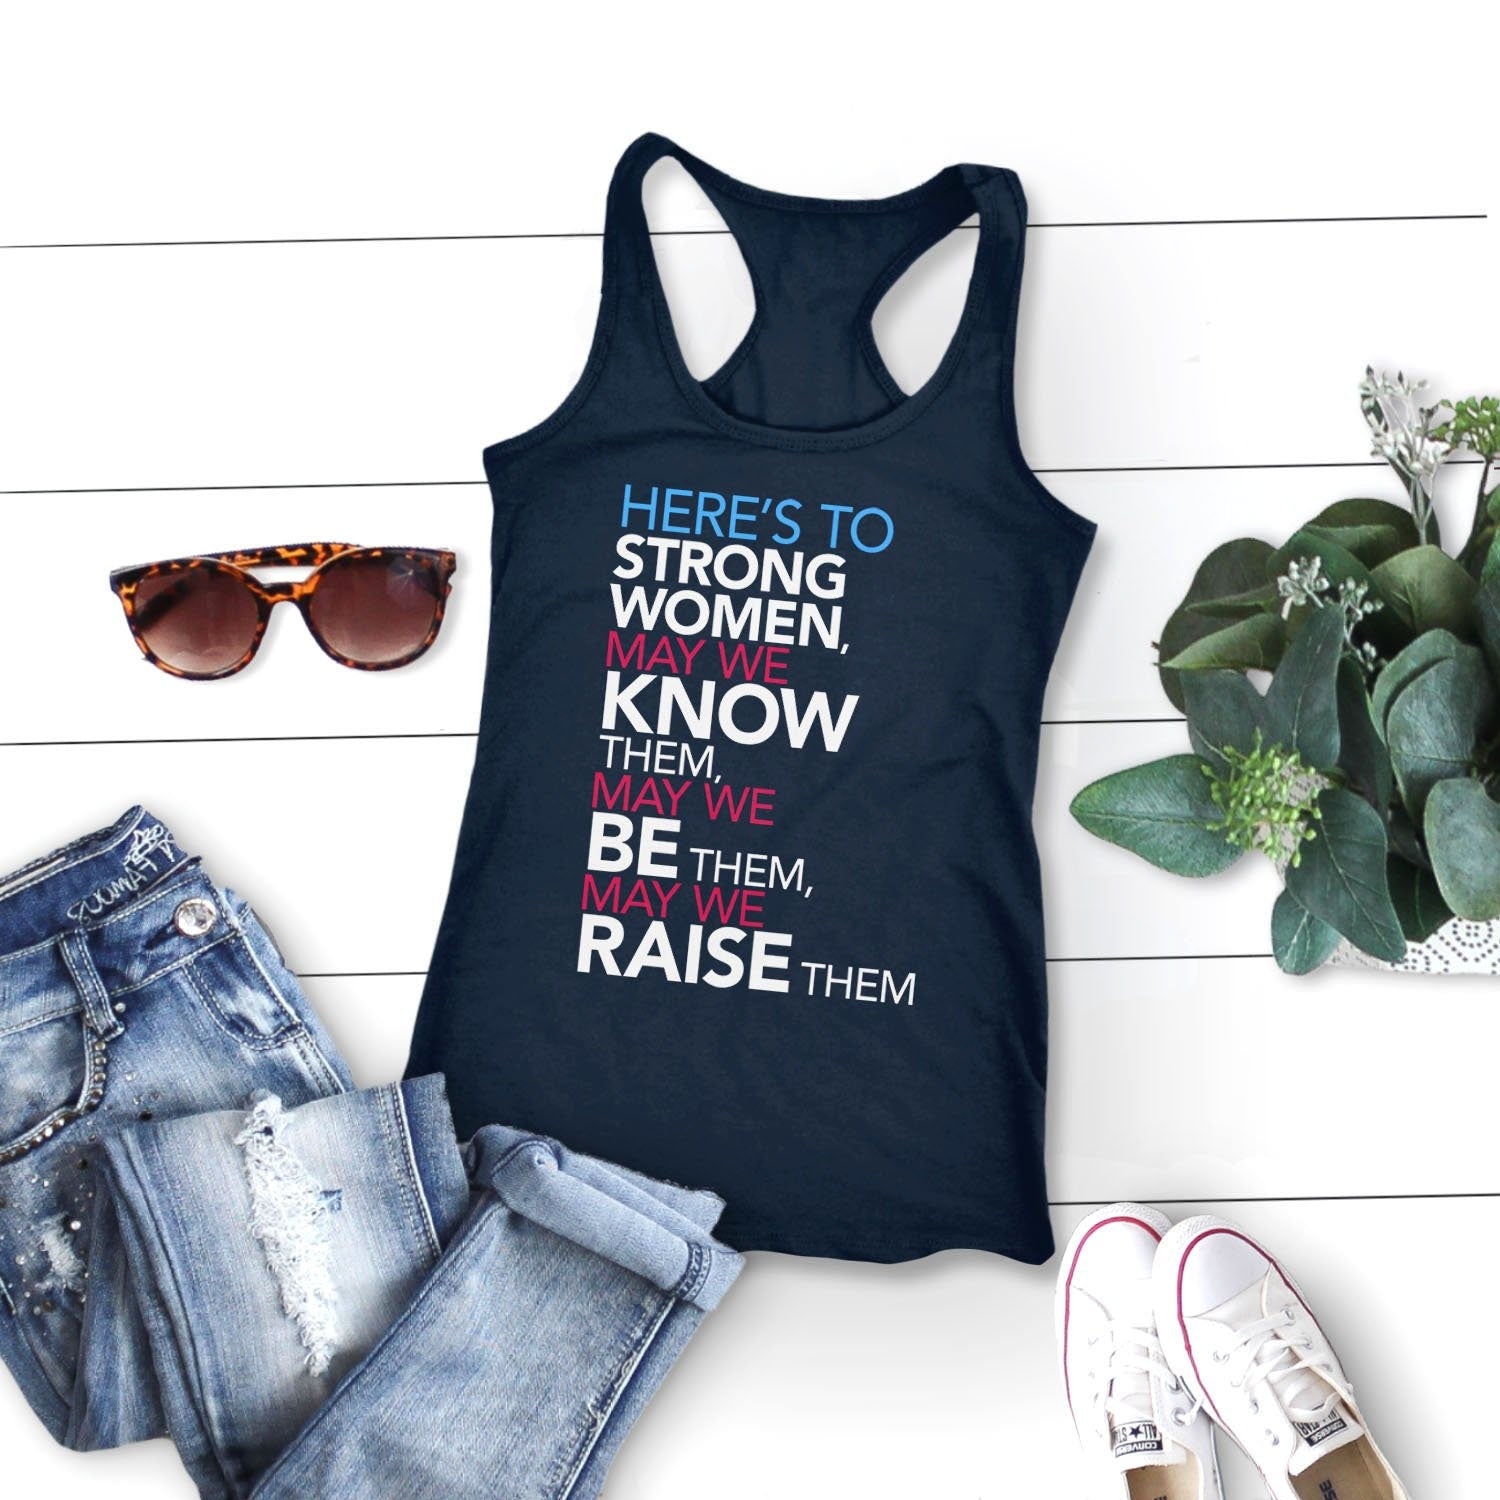 Strong Women Tank Top for Women, Black Unisex Tank S by BootsTees